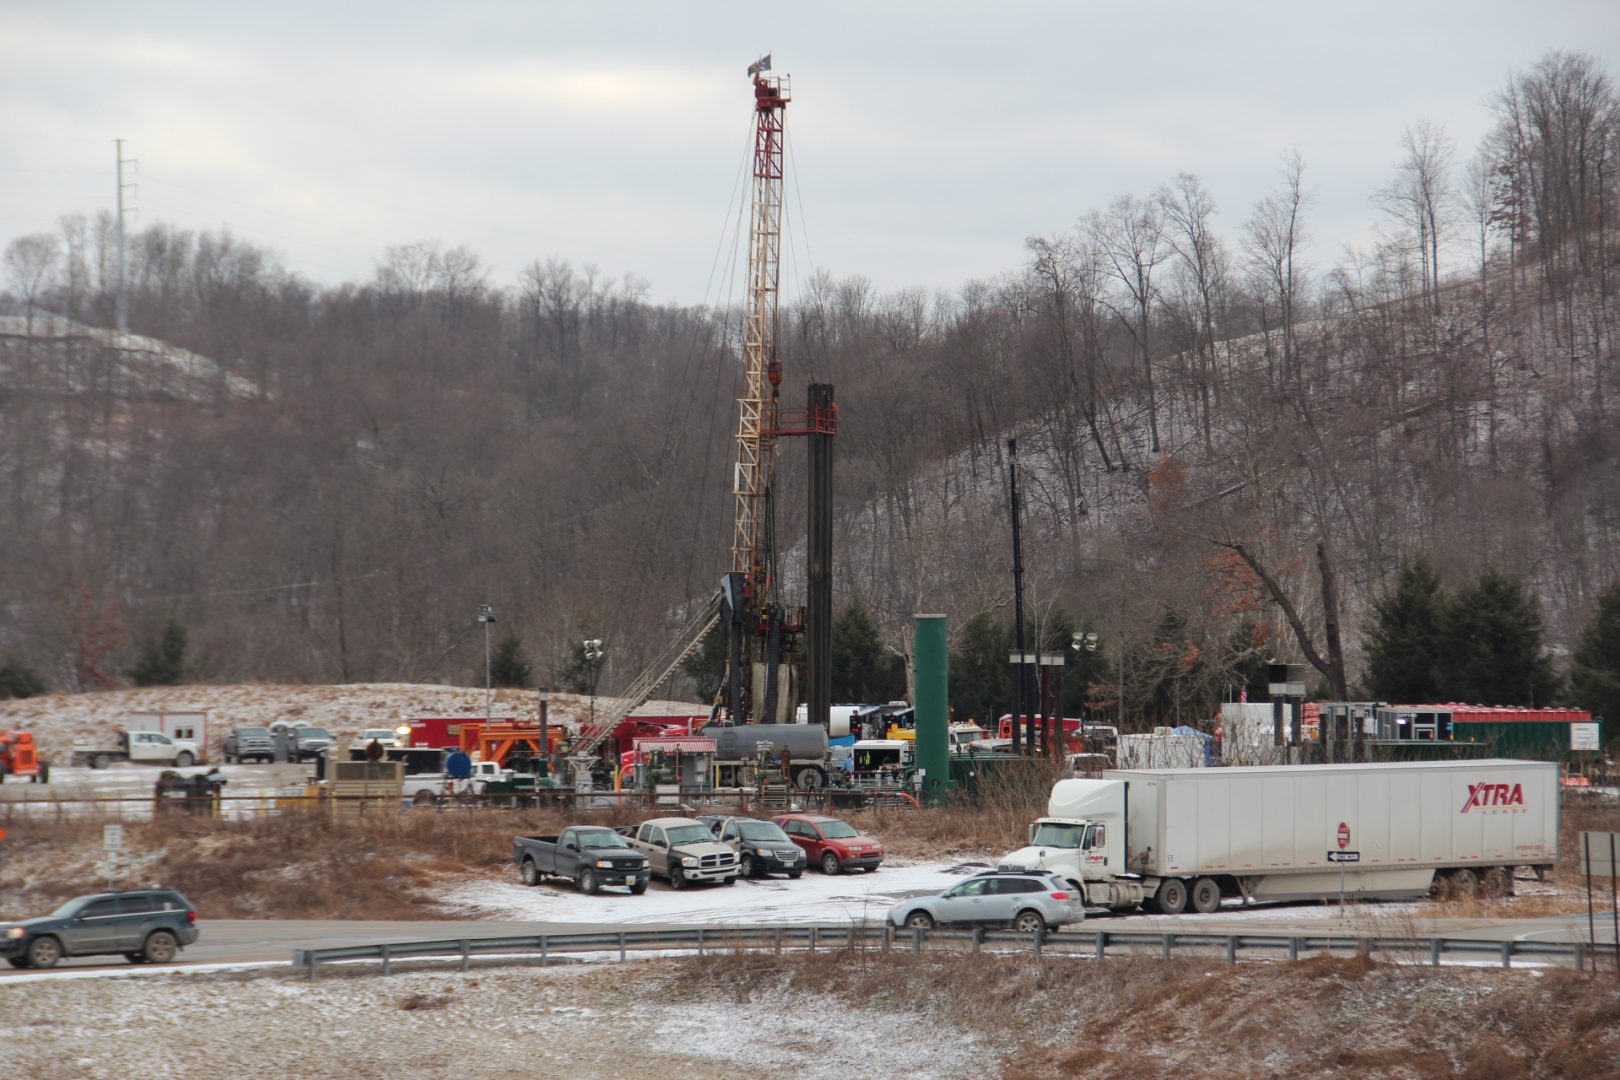 A Range Resources well site in Washington County in 2018.